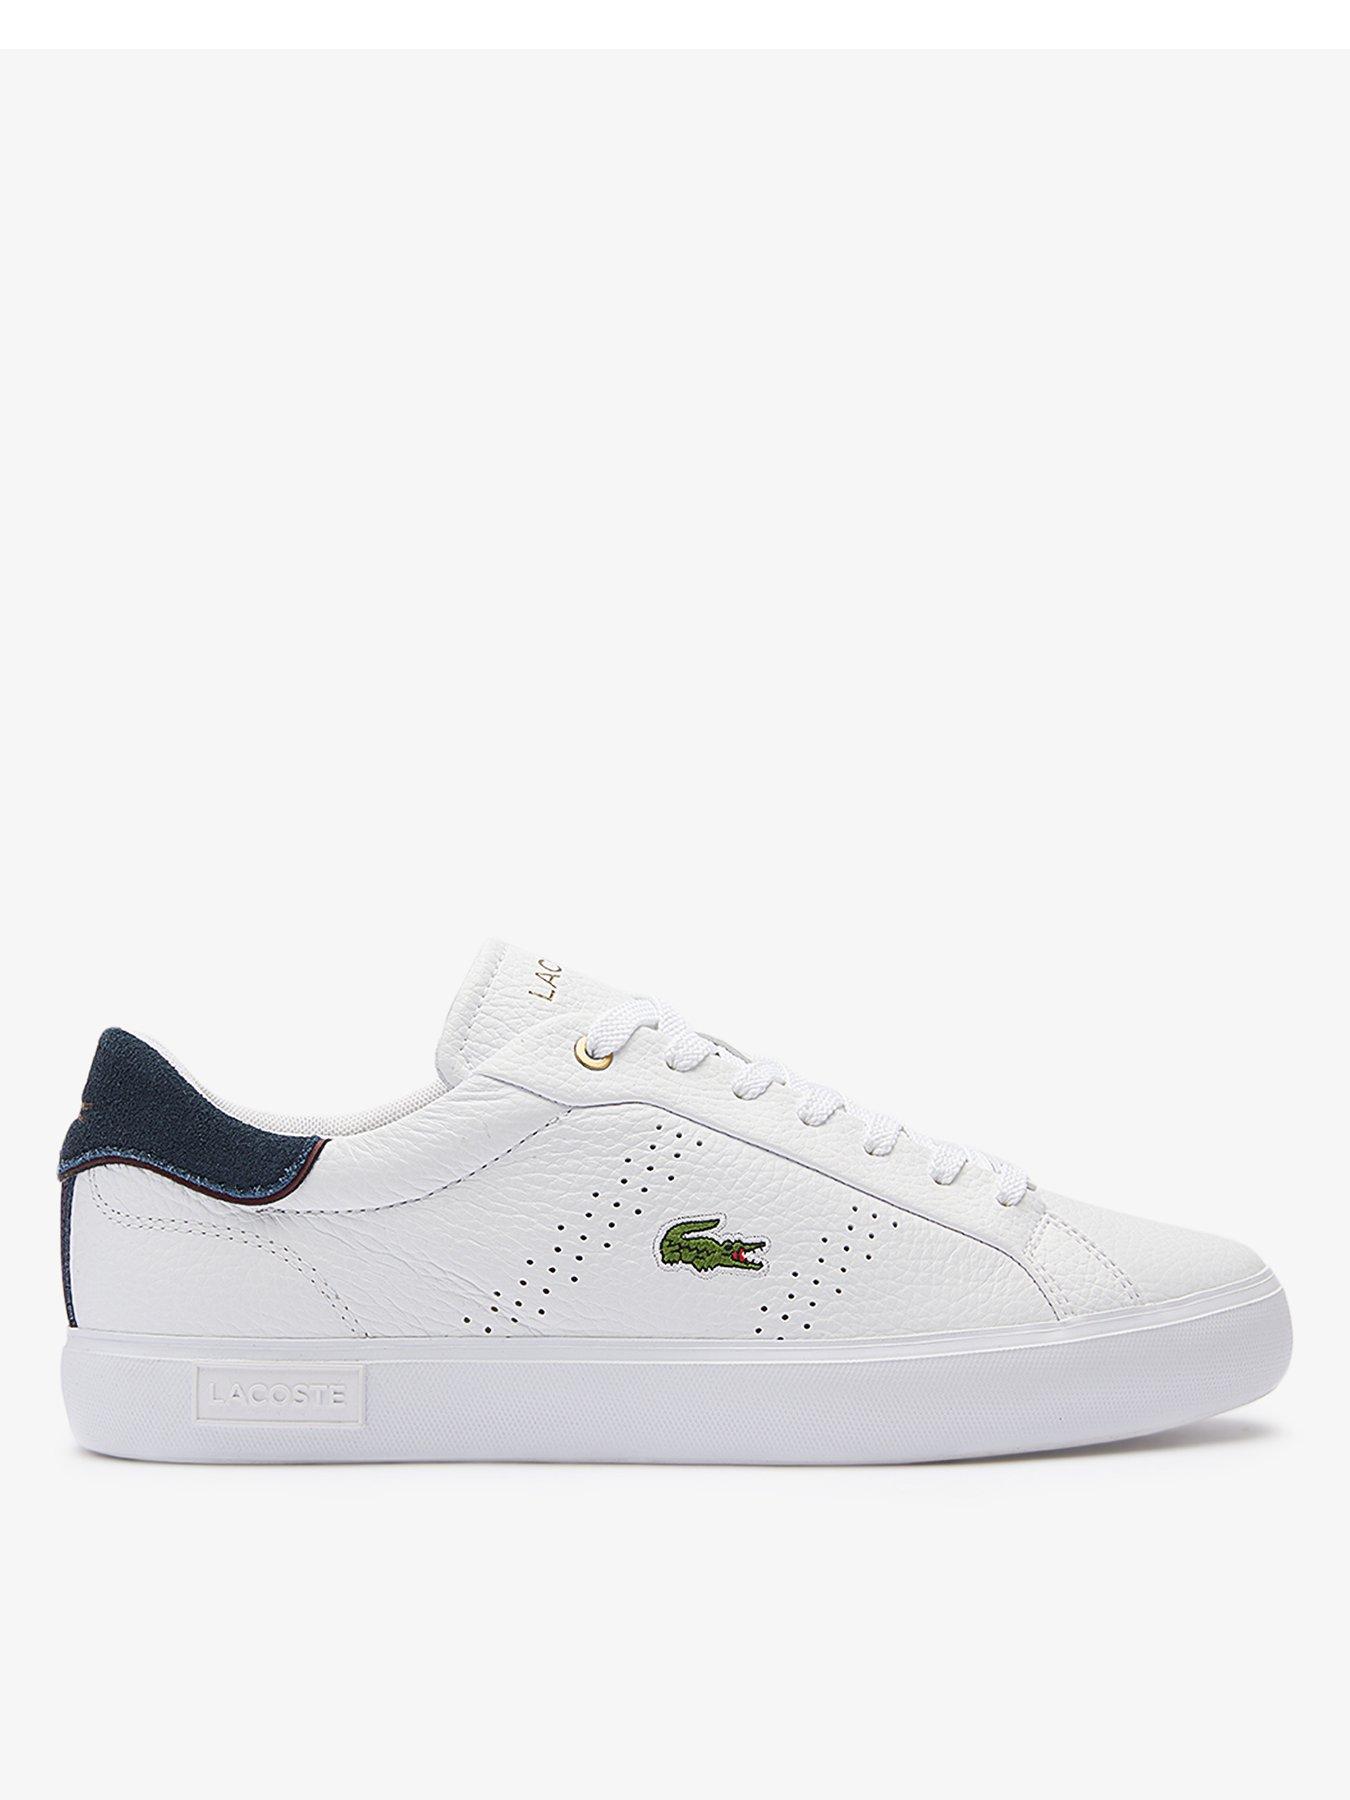 lacoste mens trainers grey